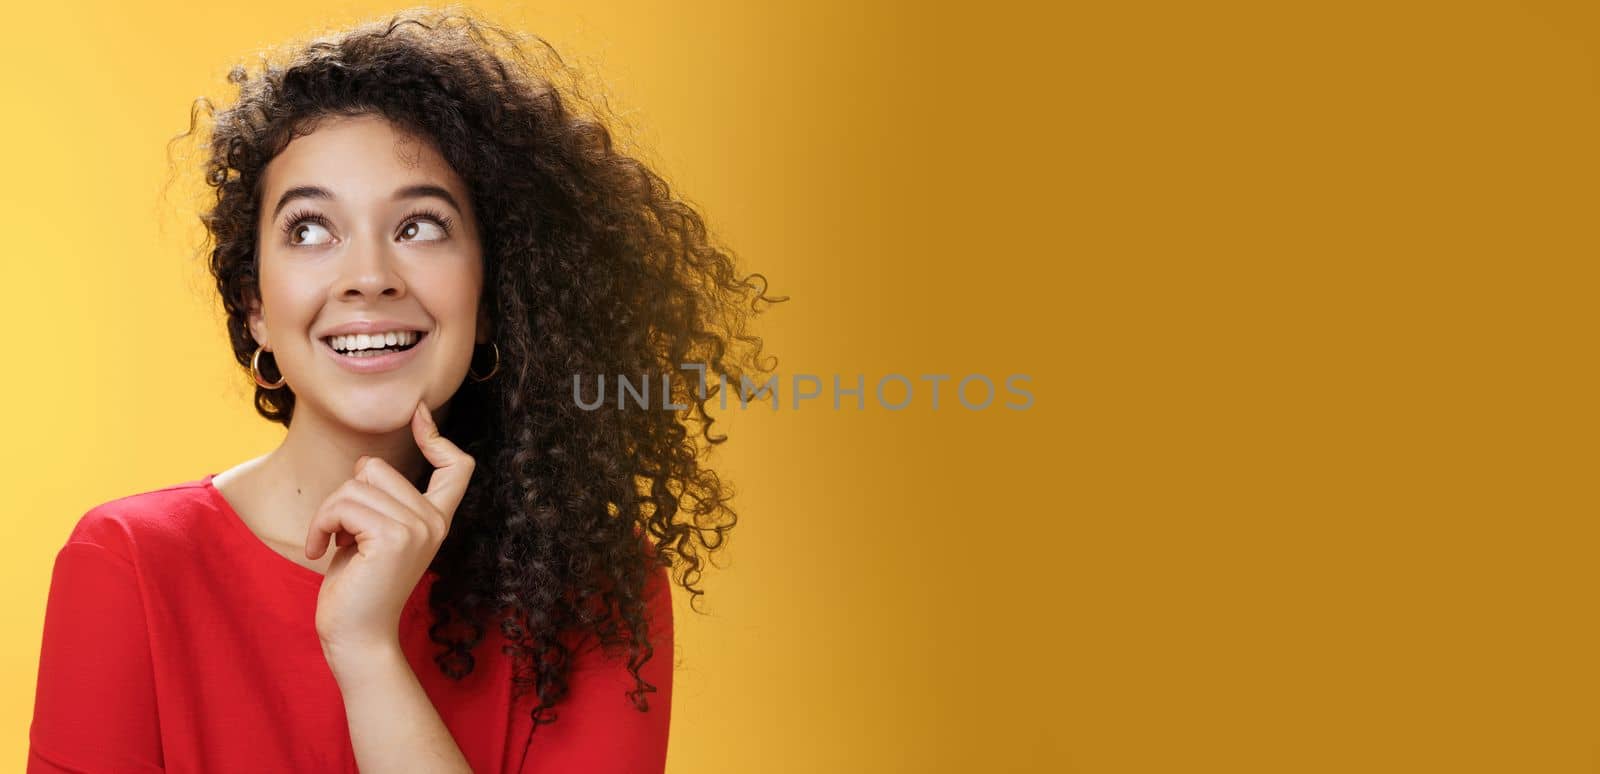 Dreamy girl making assumptions what gets as christmas present looking curious and happy at upper left corner, thinking, touching chin, standing thoughtful with desire and wish in mind over yellow wall by Benzoix